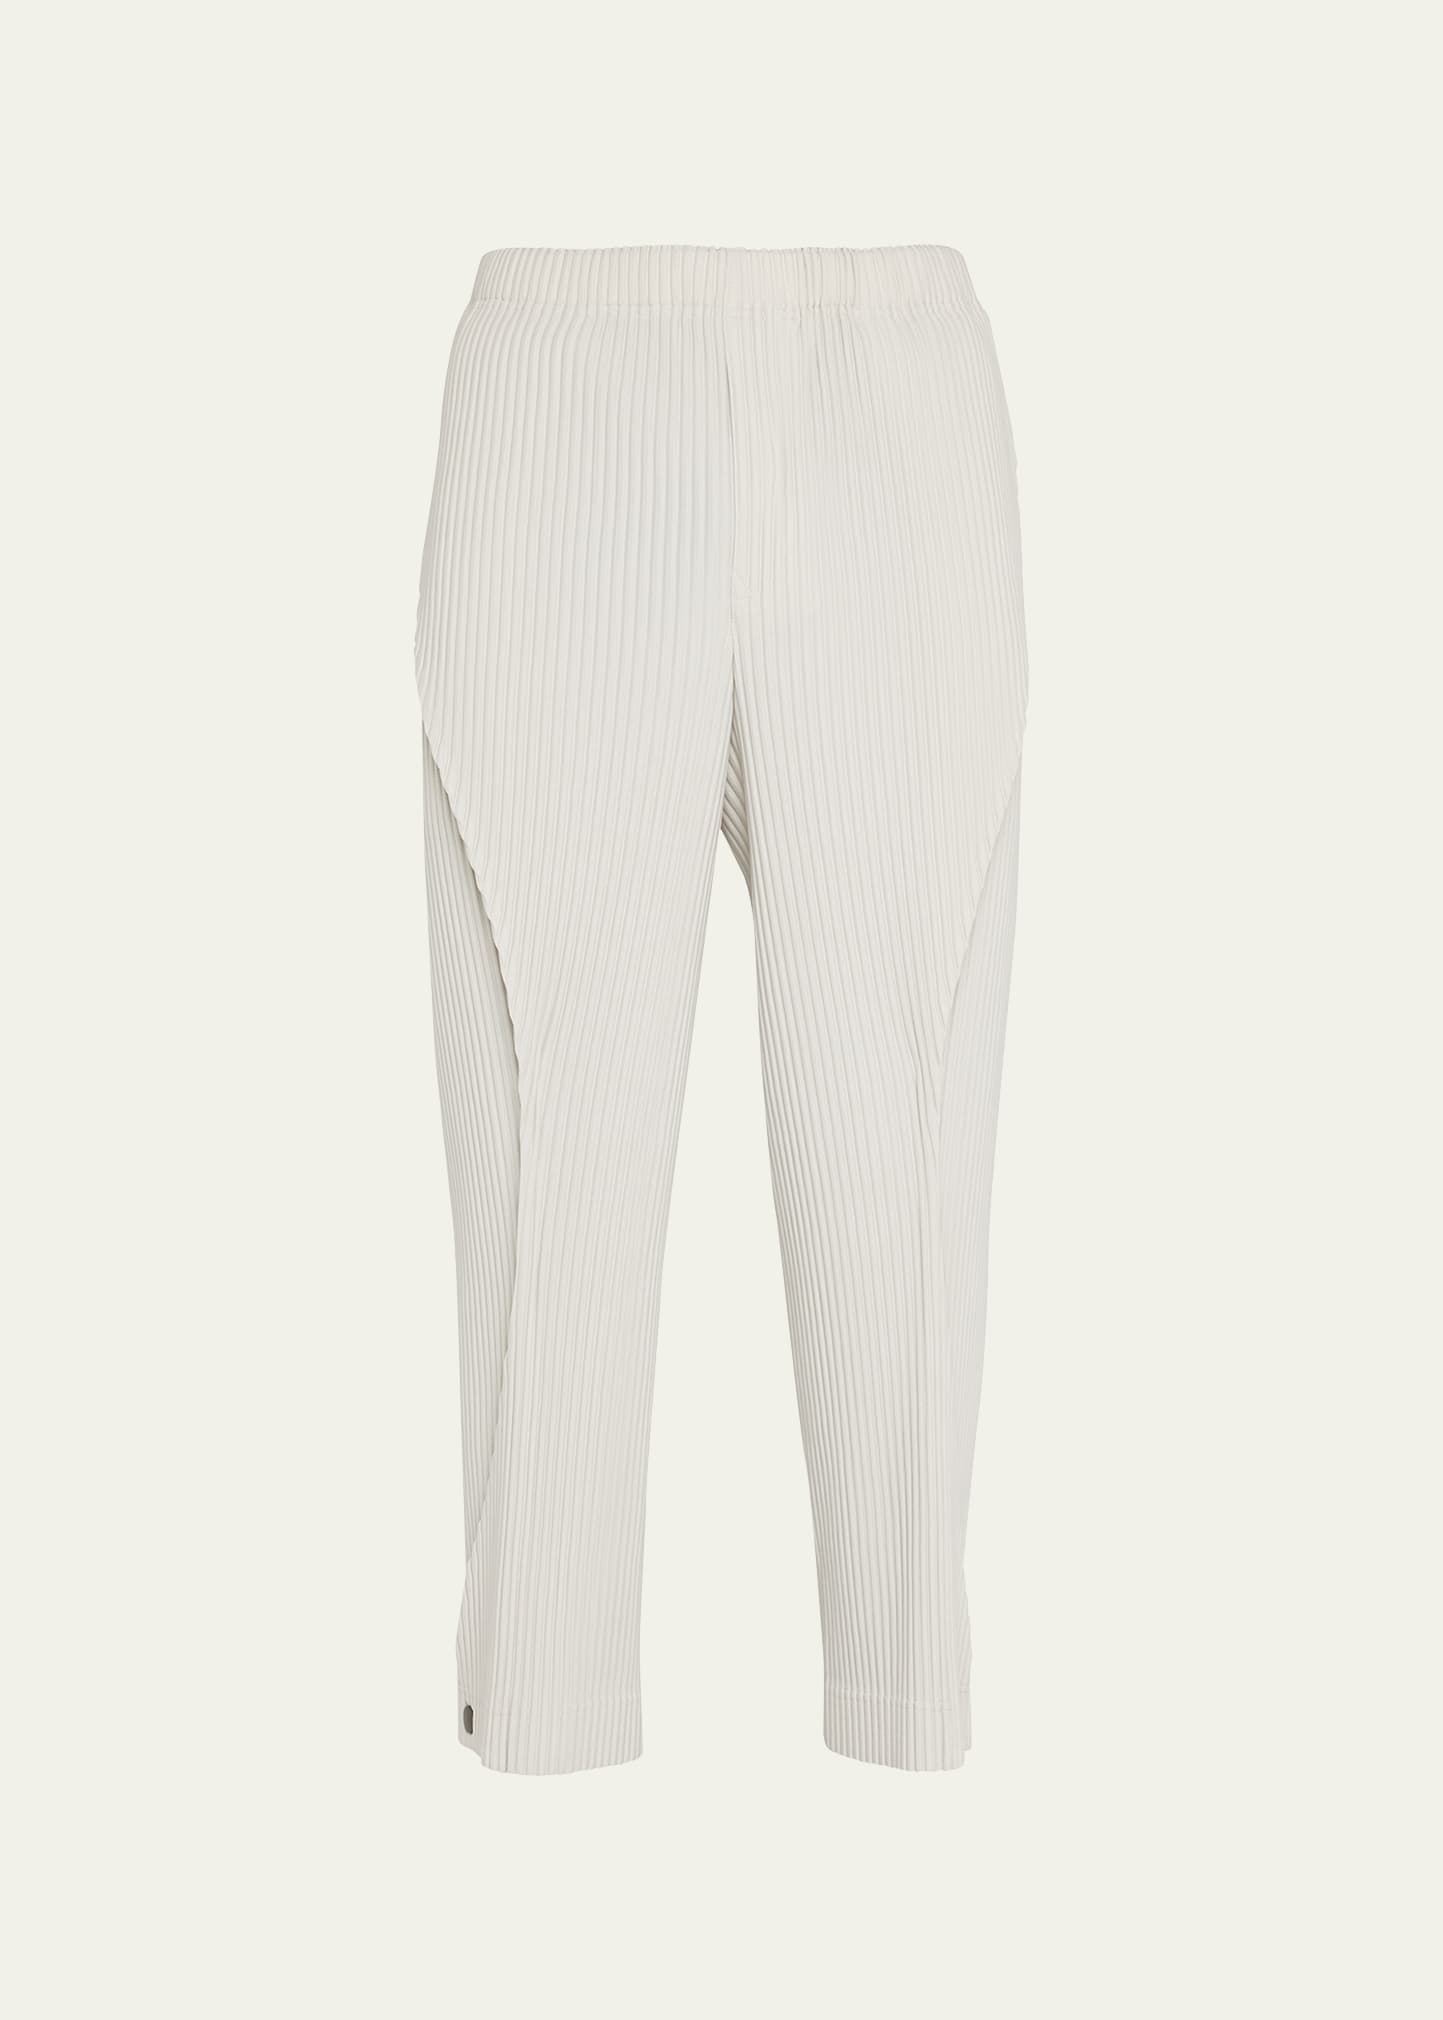 Issey Miyake Men's Pleated Curved-seam Pants In Pearl Gray